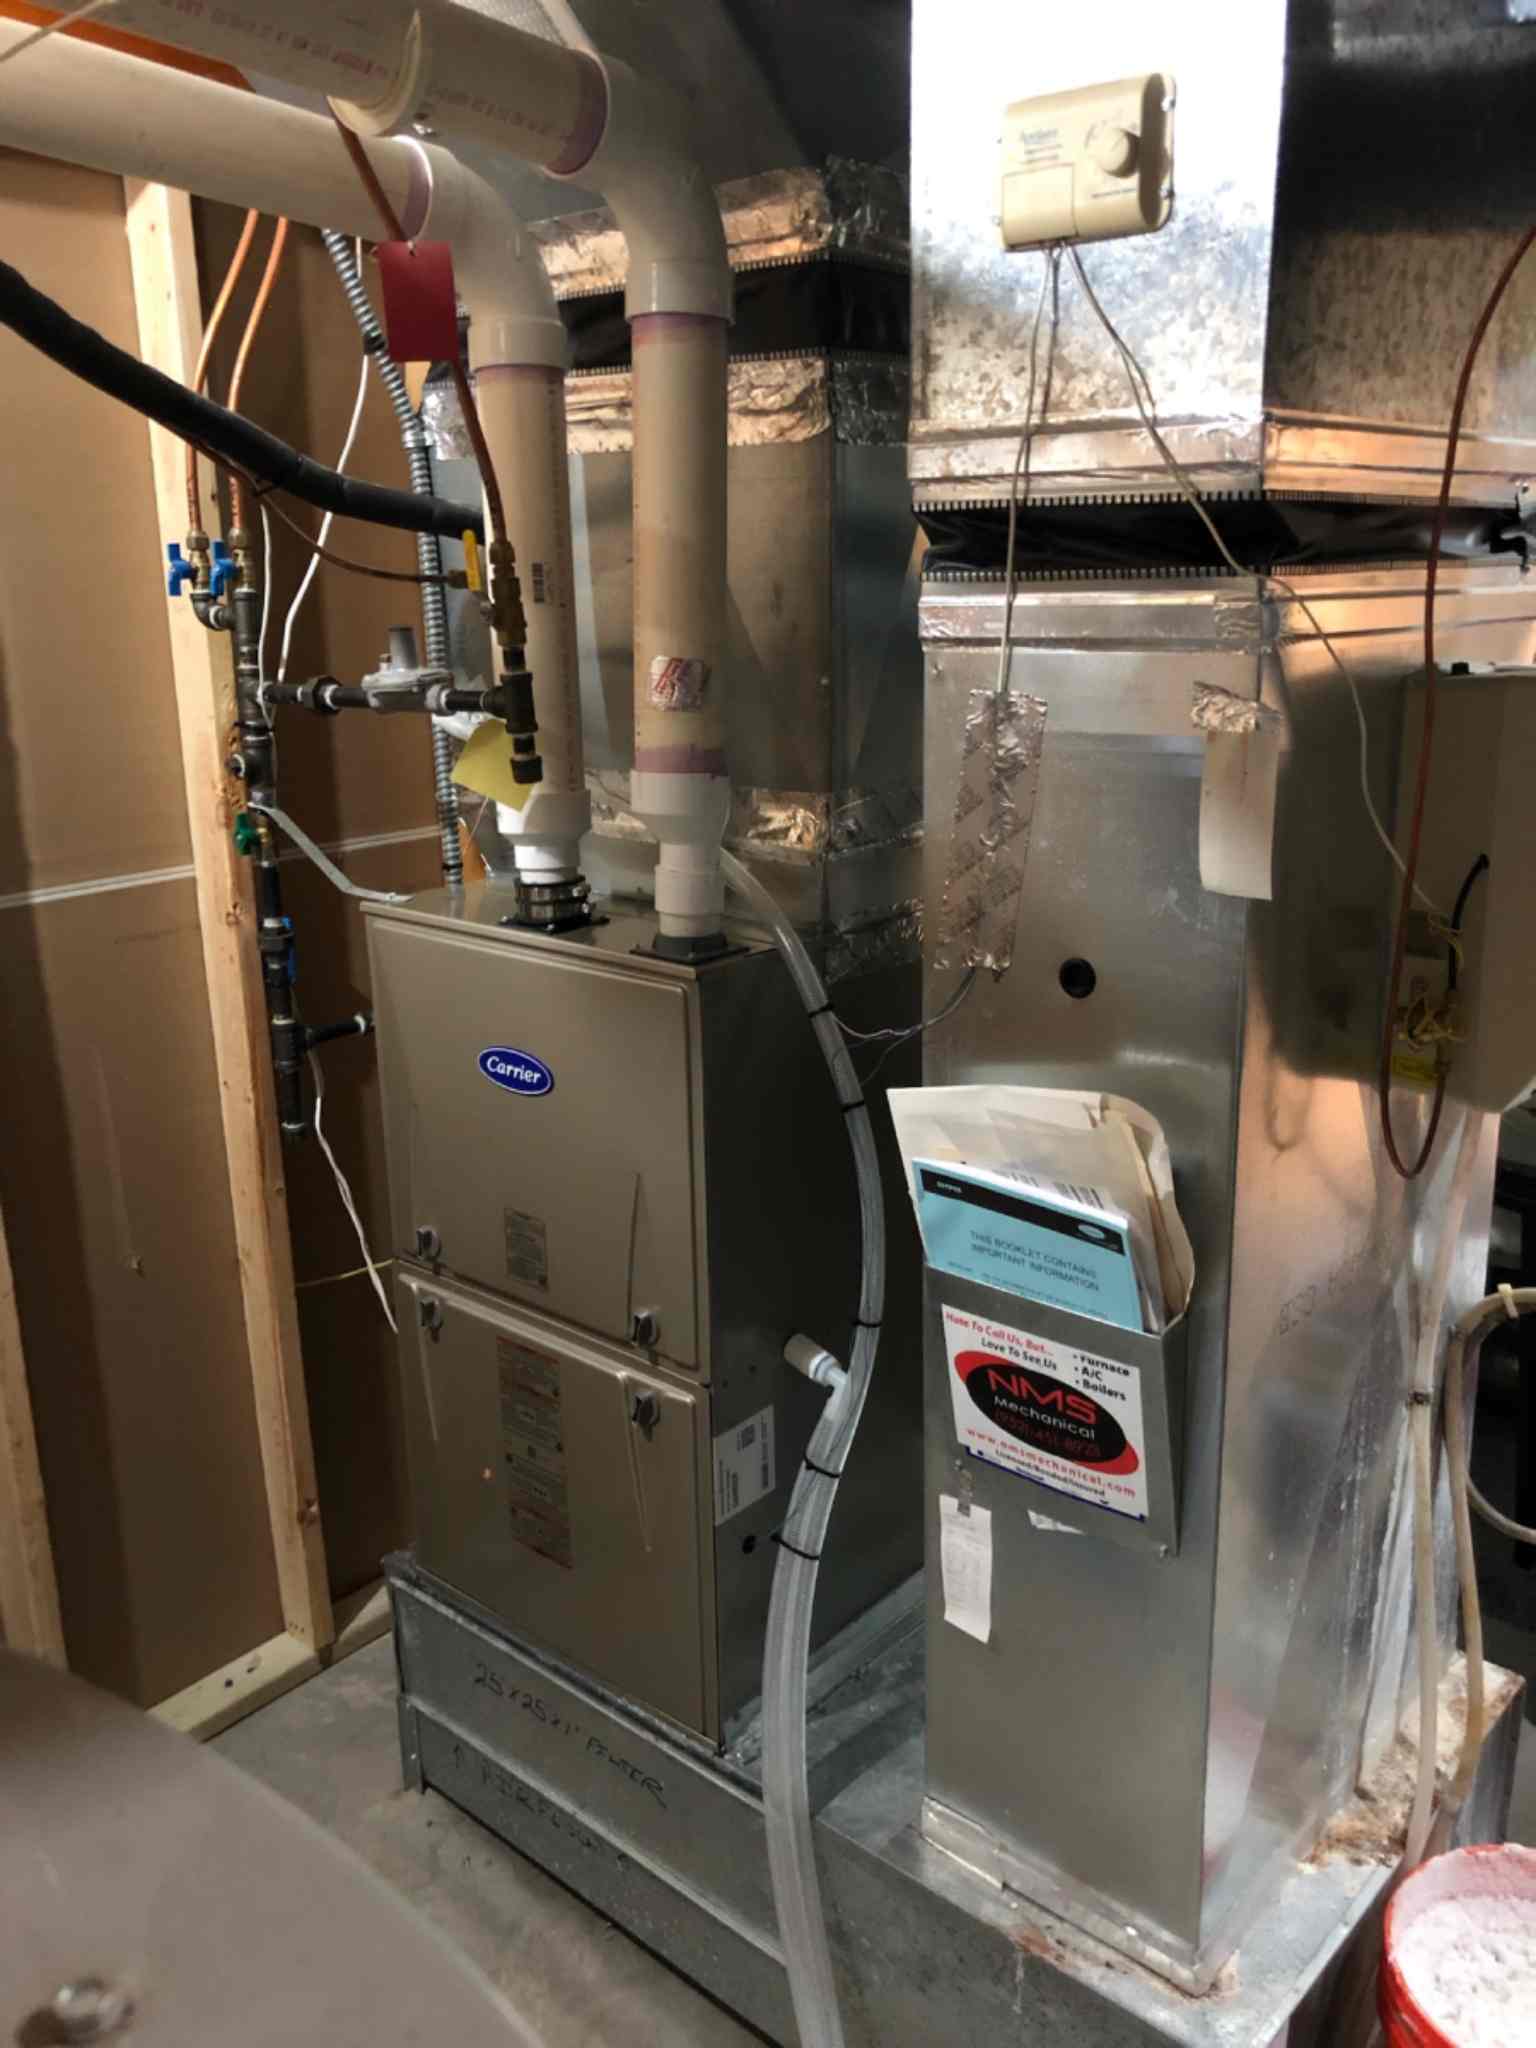 A gas furnace and air conditioner in a home.